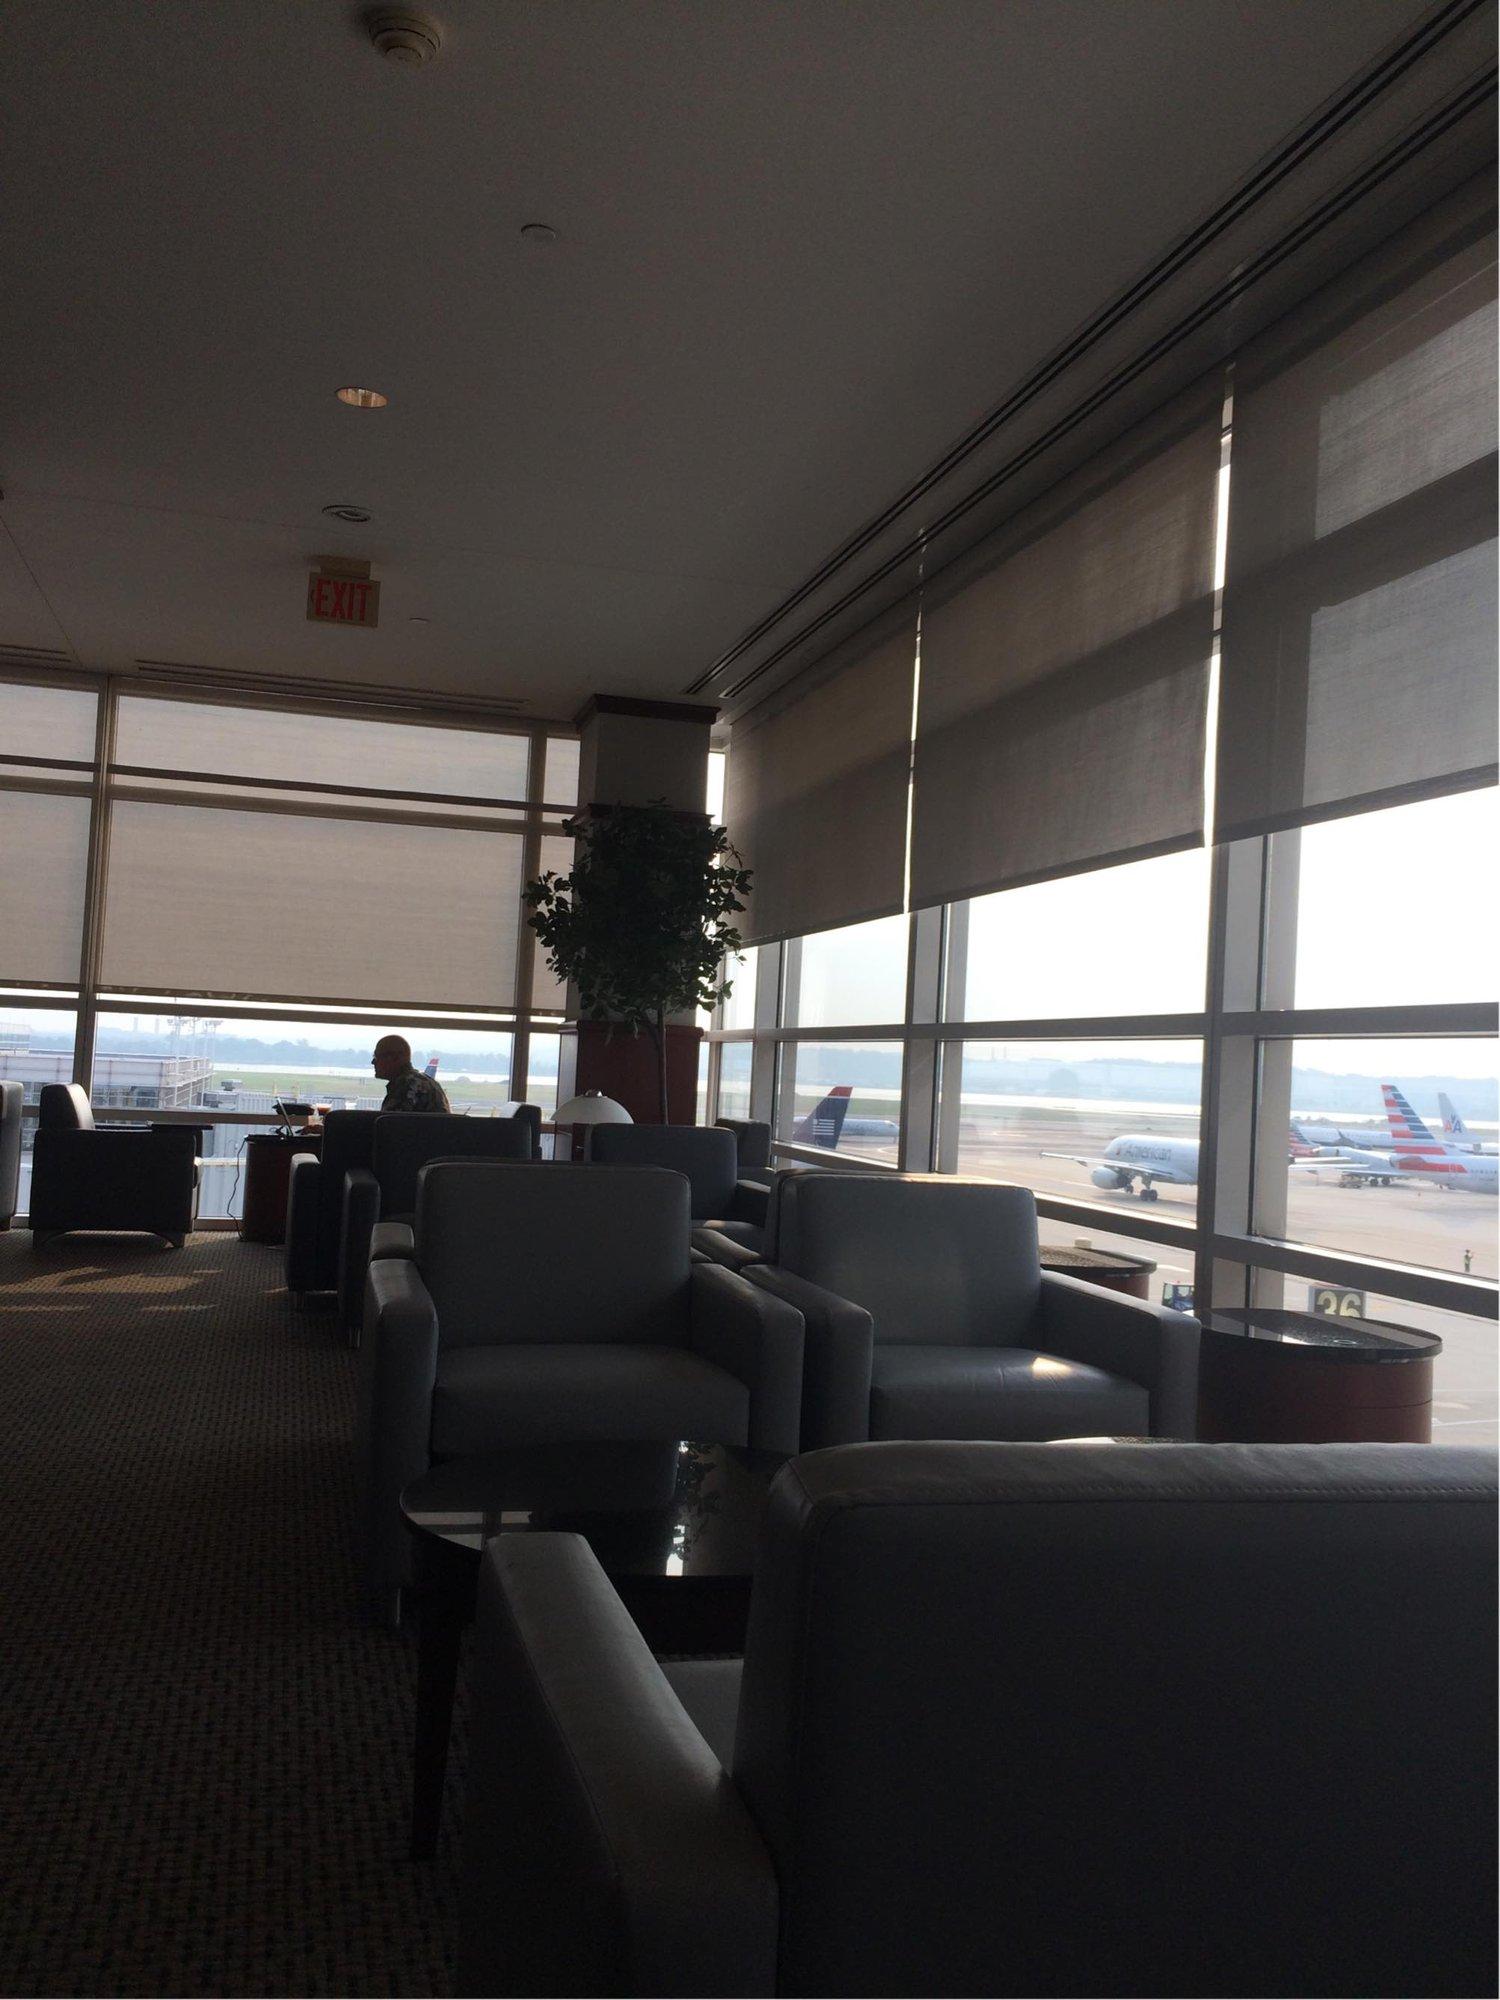 American Airlines Admirals Club image 2 of 19